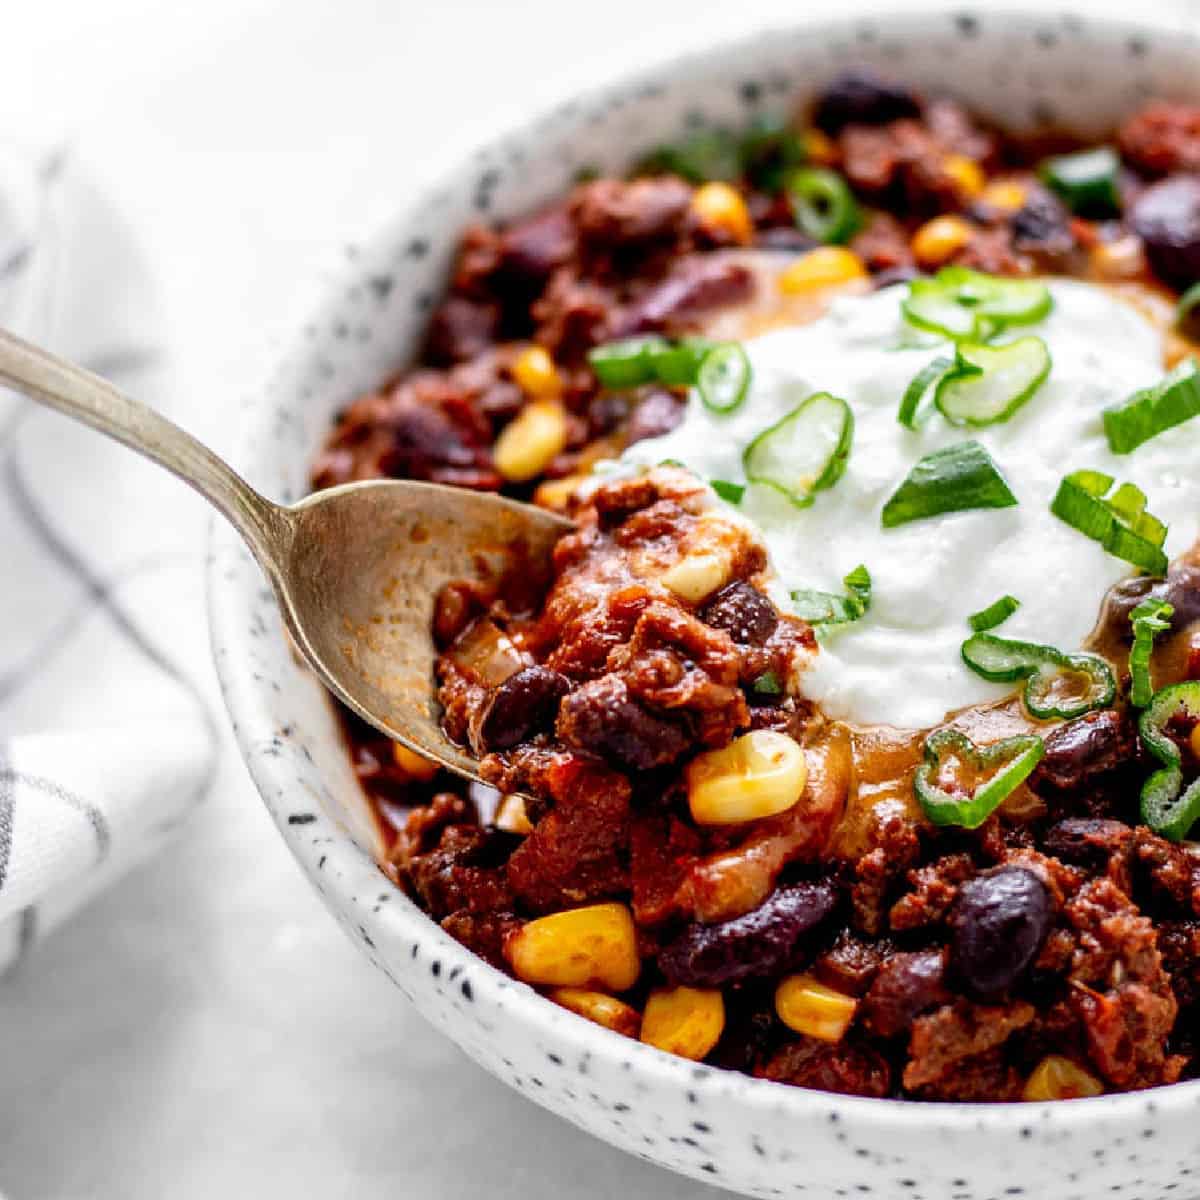 A bowl of chili con carne with a dollop of sour cream and a spoon.